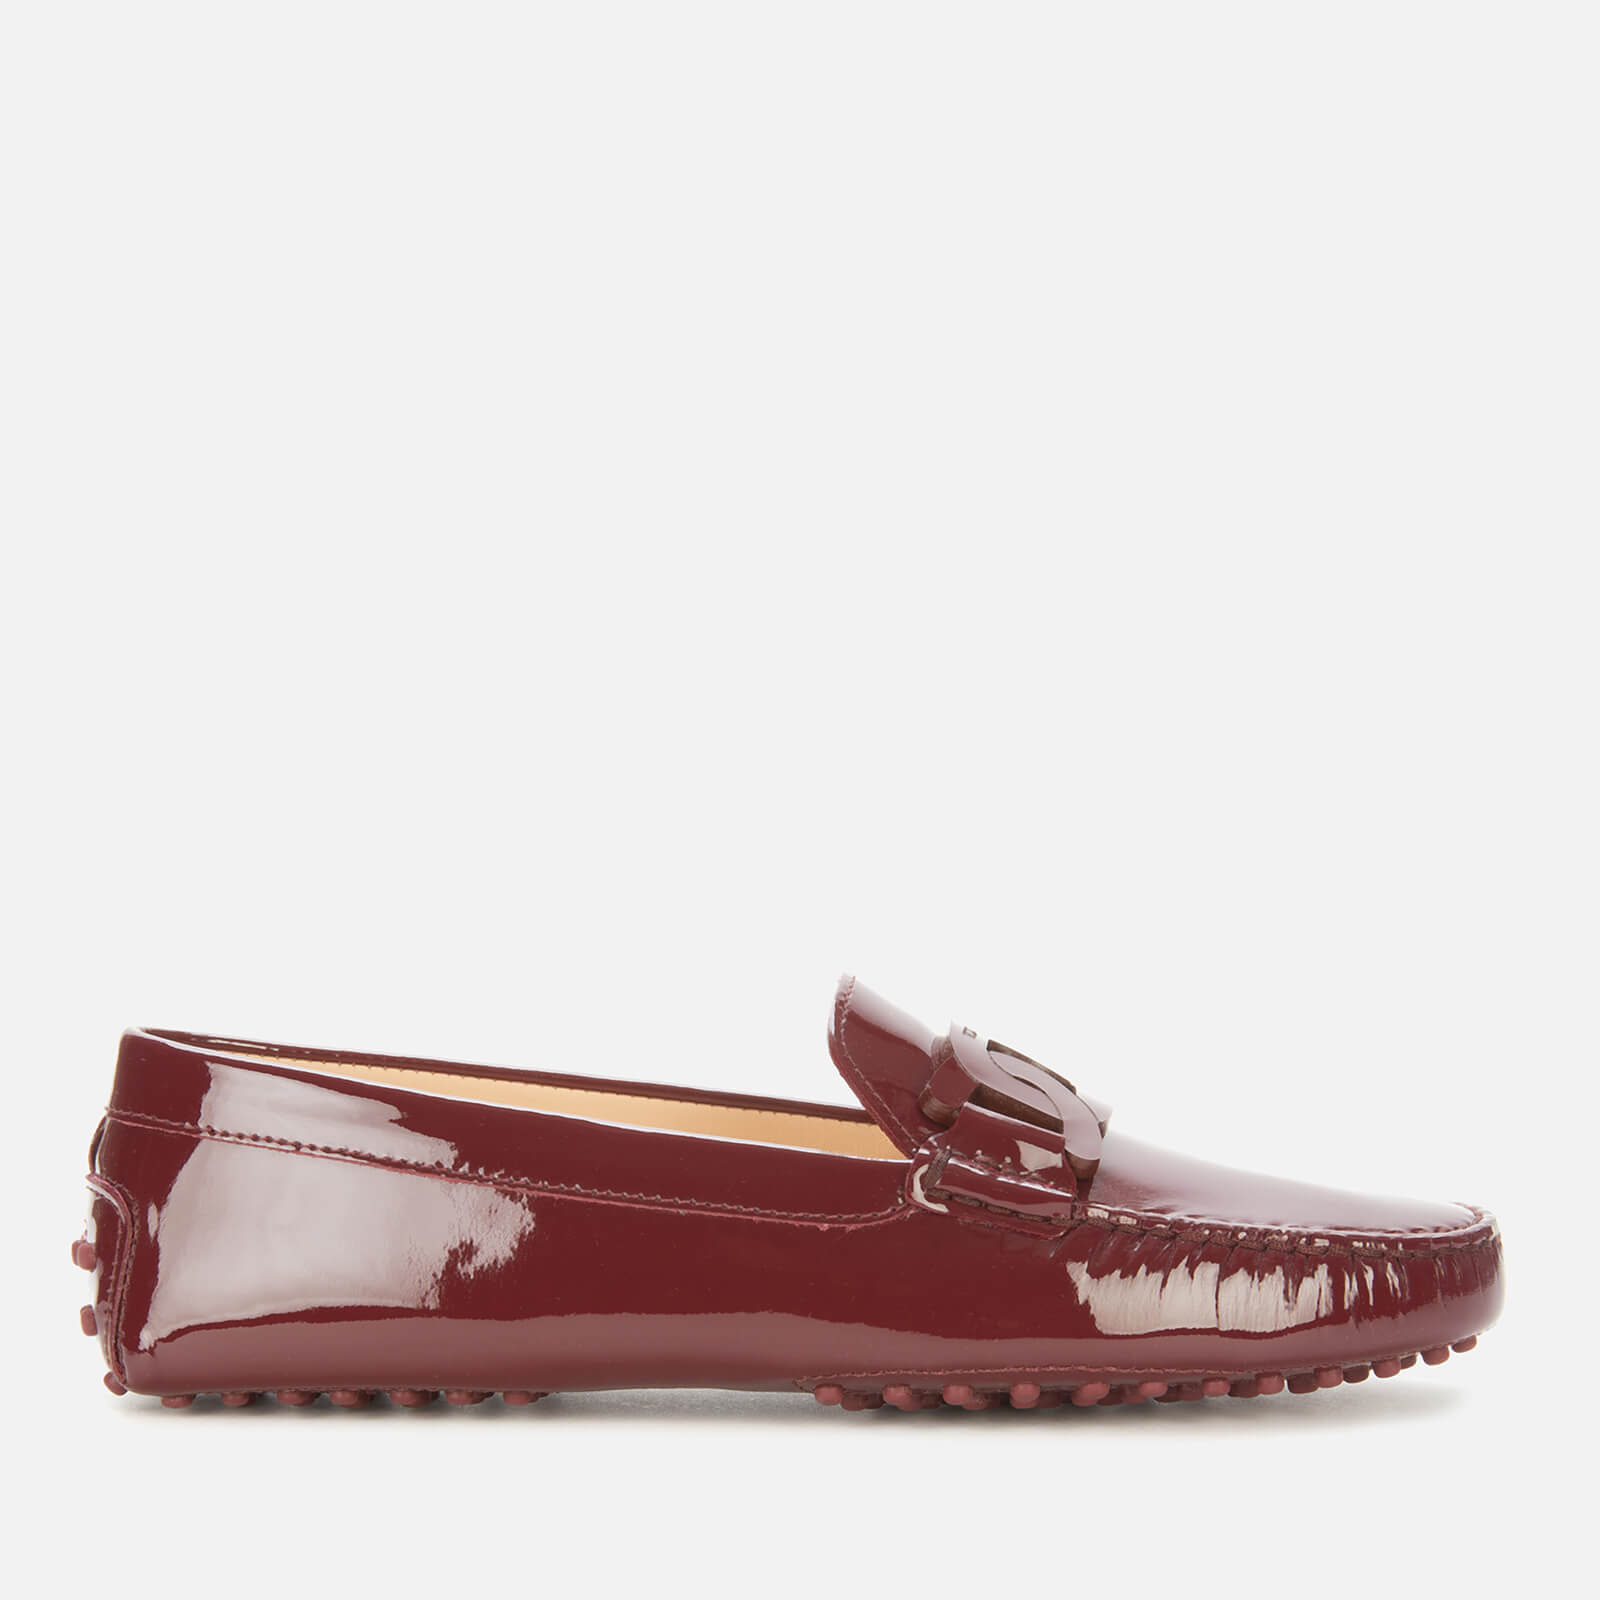 Tod's Women's Gommino Patent Leather Driving Shoes - Burgundy - UK 4